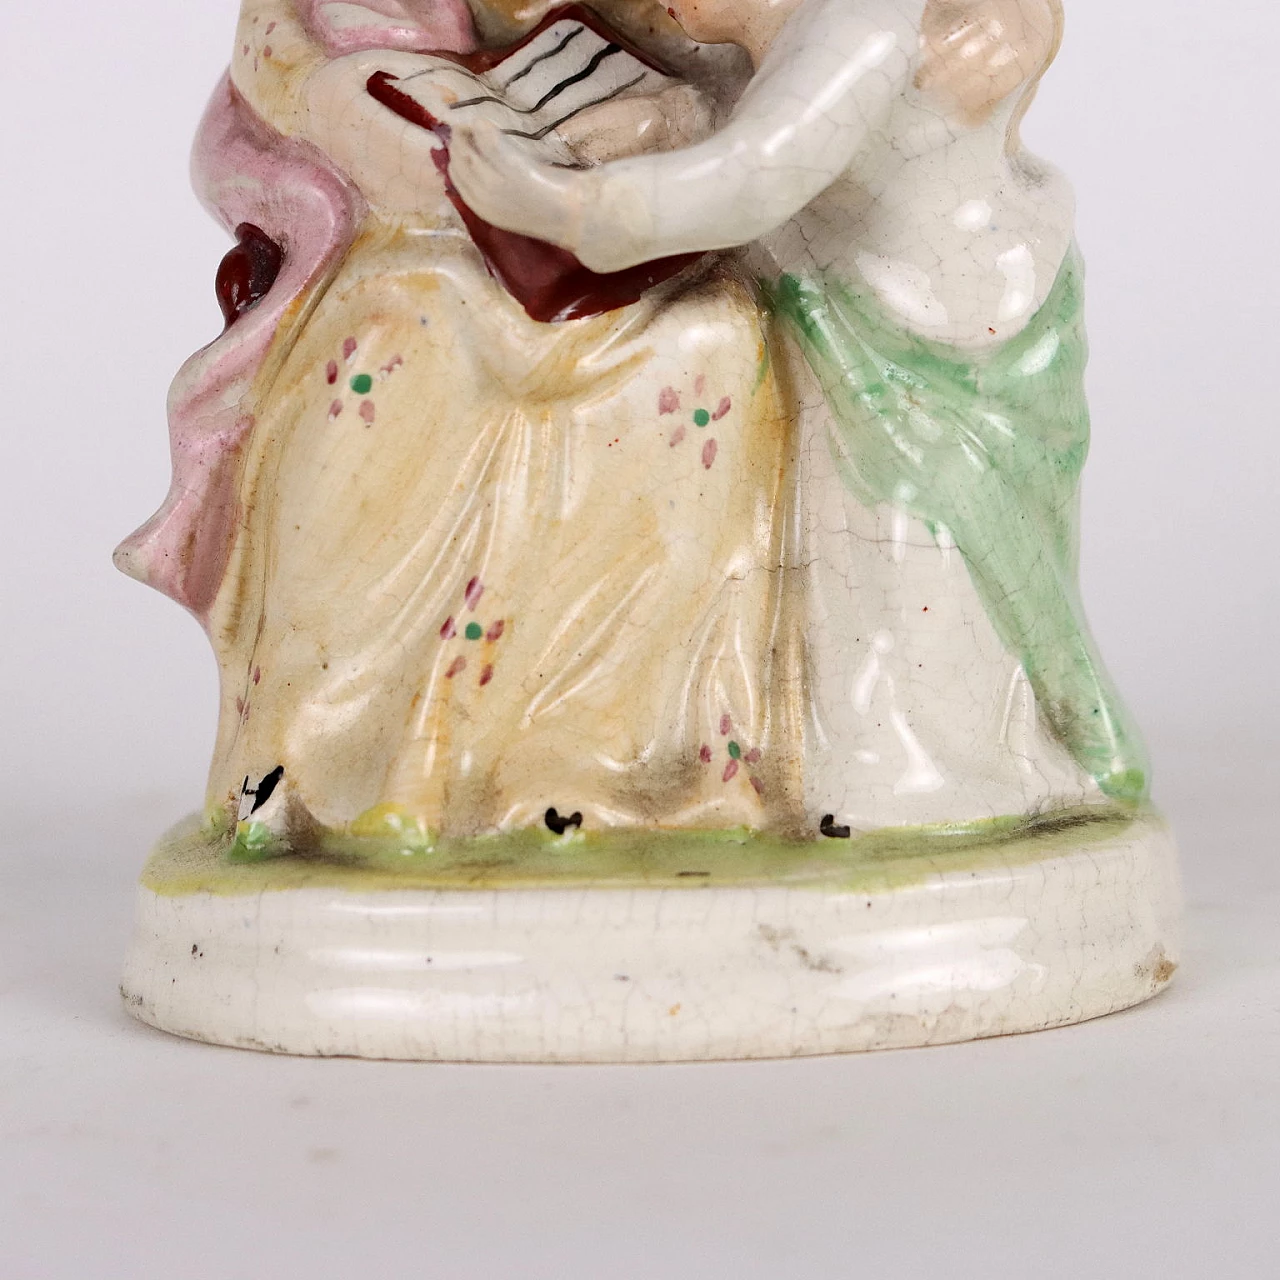 Woman and child, sculpture in Staffordshire porcelain, 19th century 5